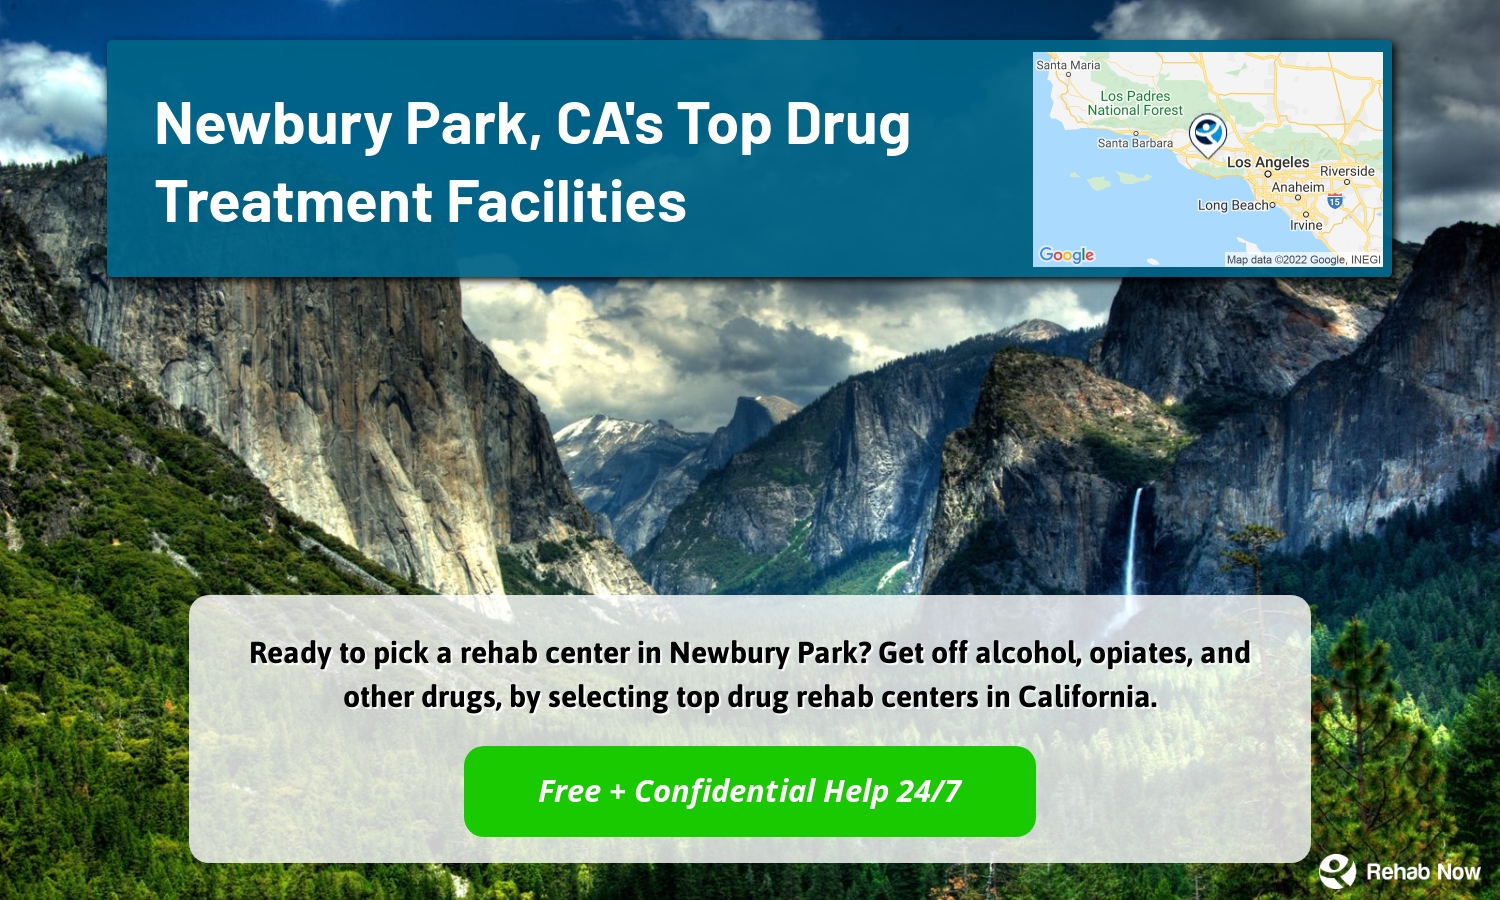 Ready to pick a rehab center in Newbury Park? Get off alcohol, opiates, and other drugs, by selecting top drug rehab centers in California.